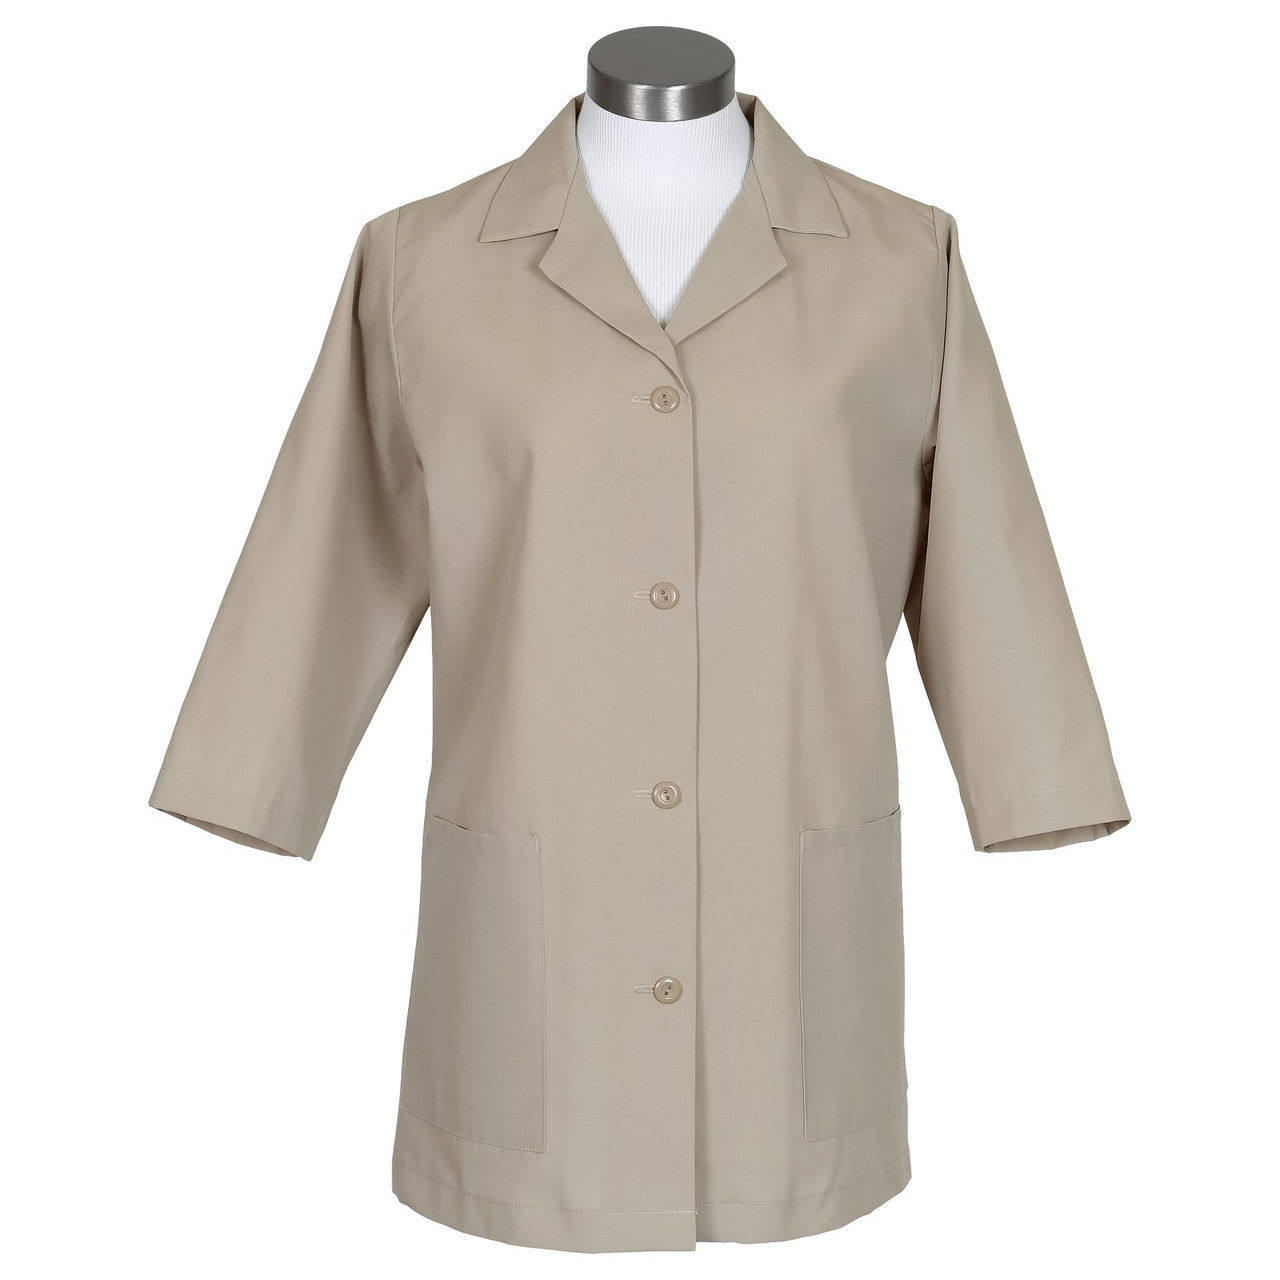 Can you describe the pocket design of the tan smock in the Female Smock, Tan, Fame 72 product?